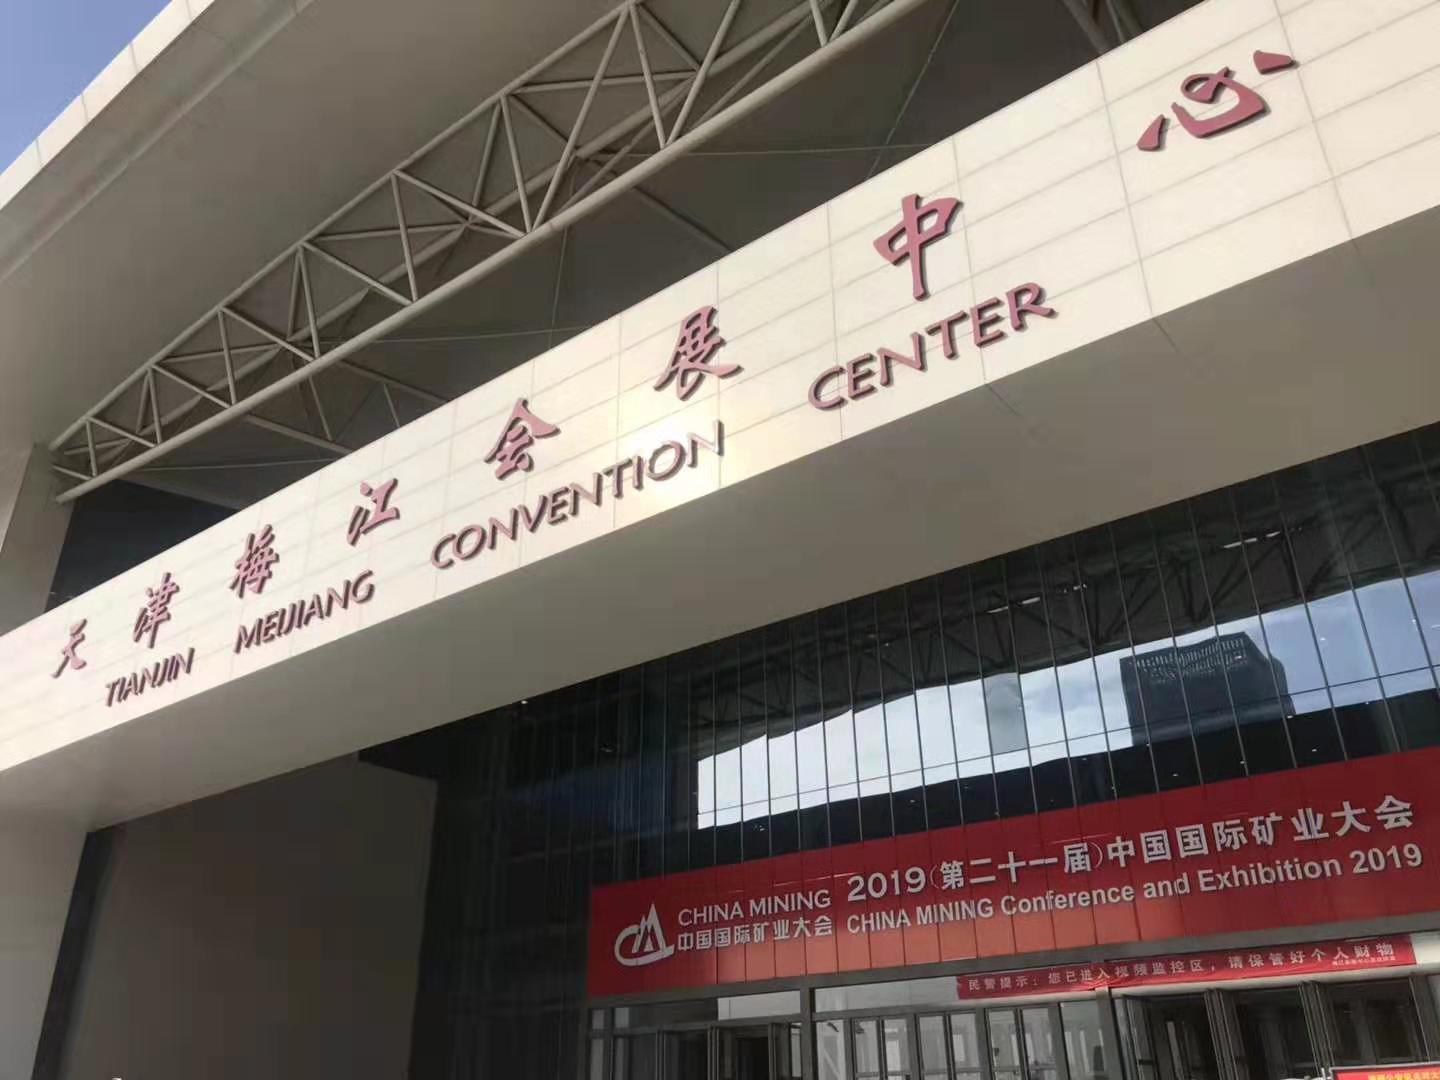 China mining conference and exhibition 2019